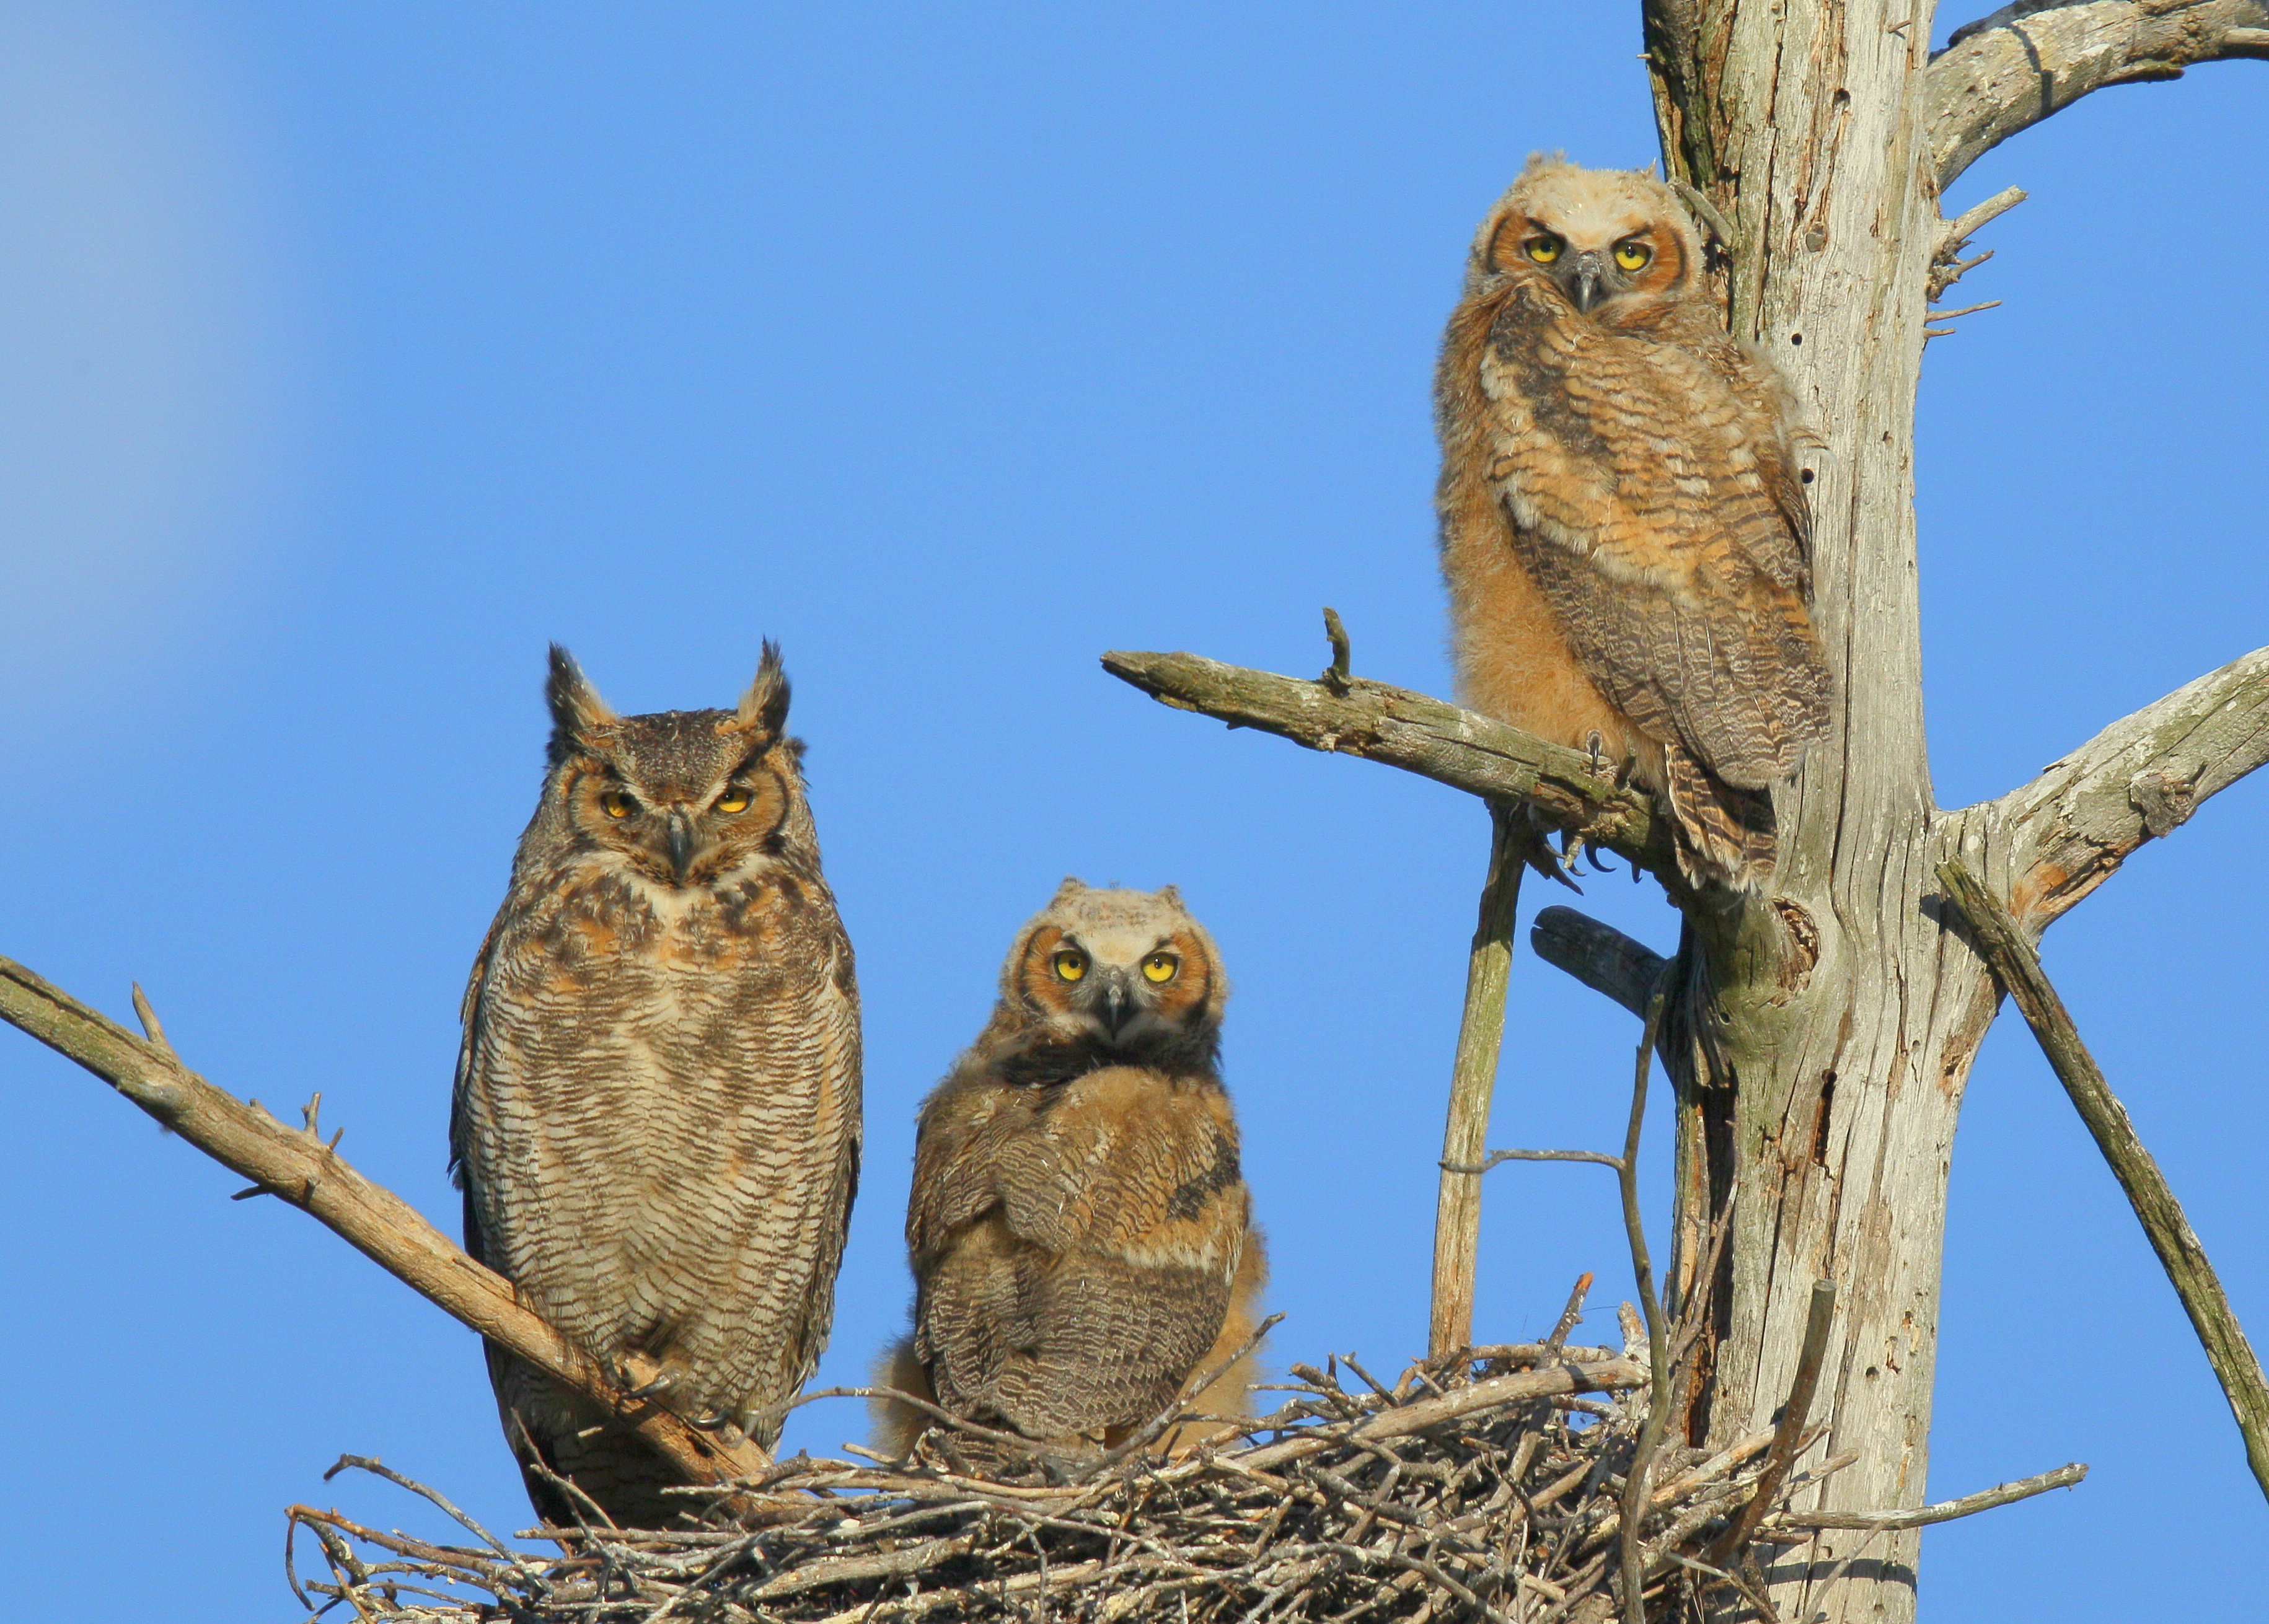 Great Horned Owl & Owlets starting to branch out!